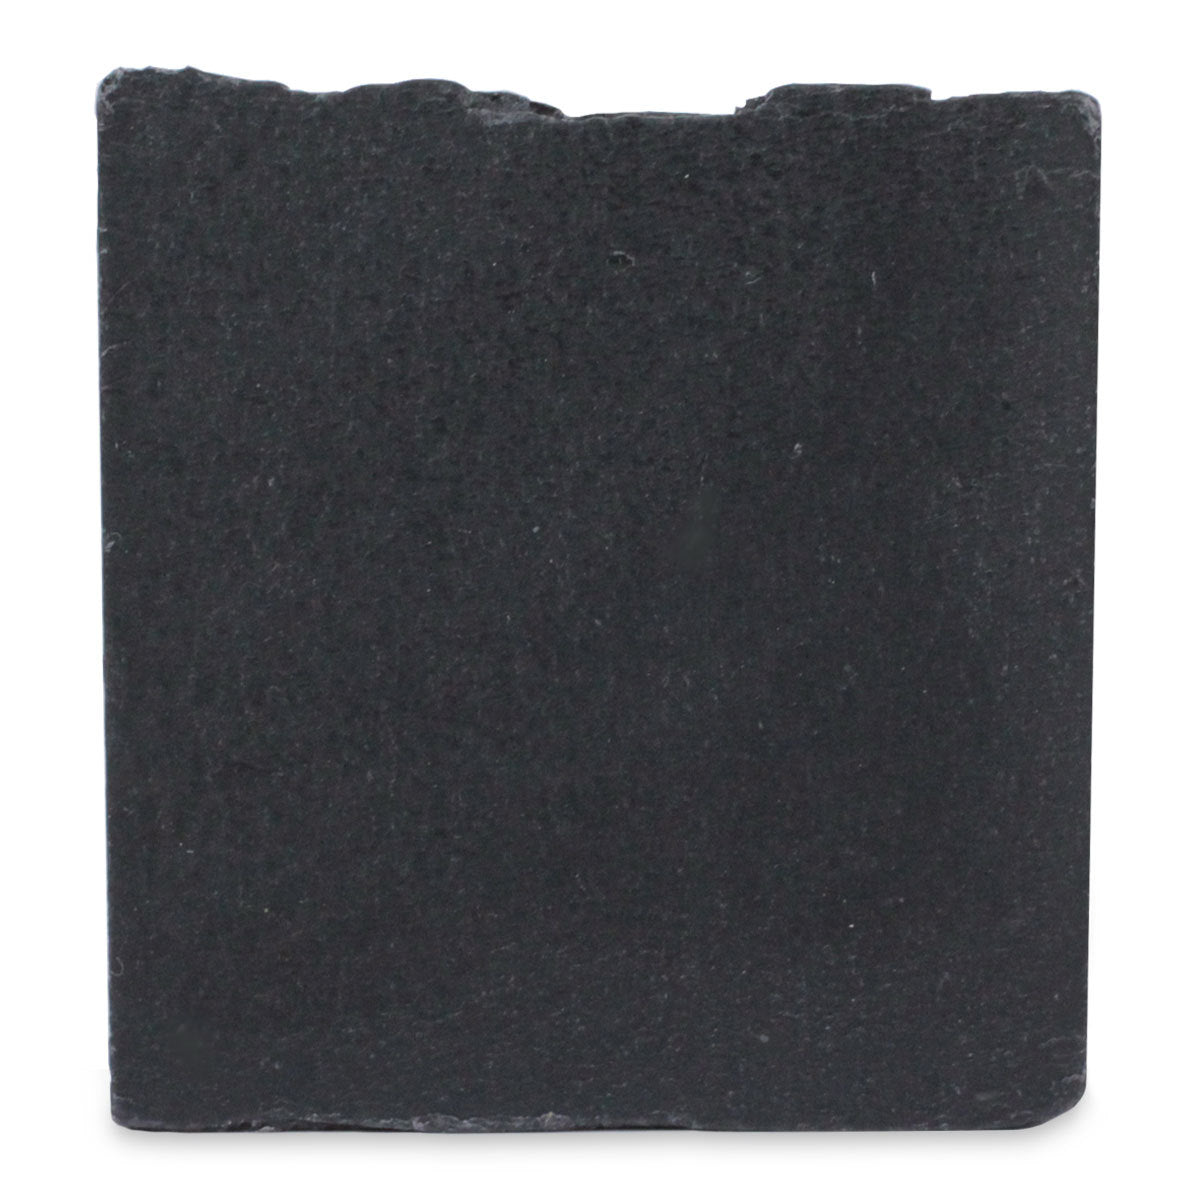 Primary image of Bamboo Charcoal Soap